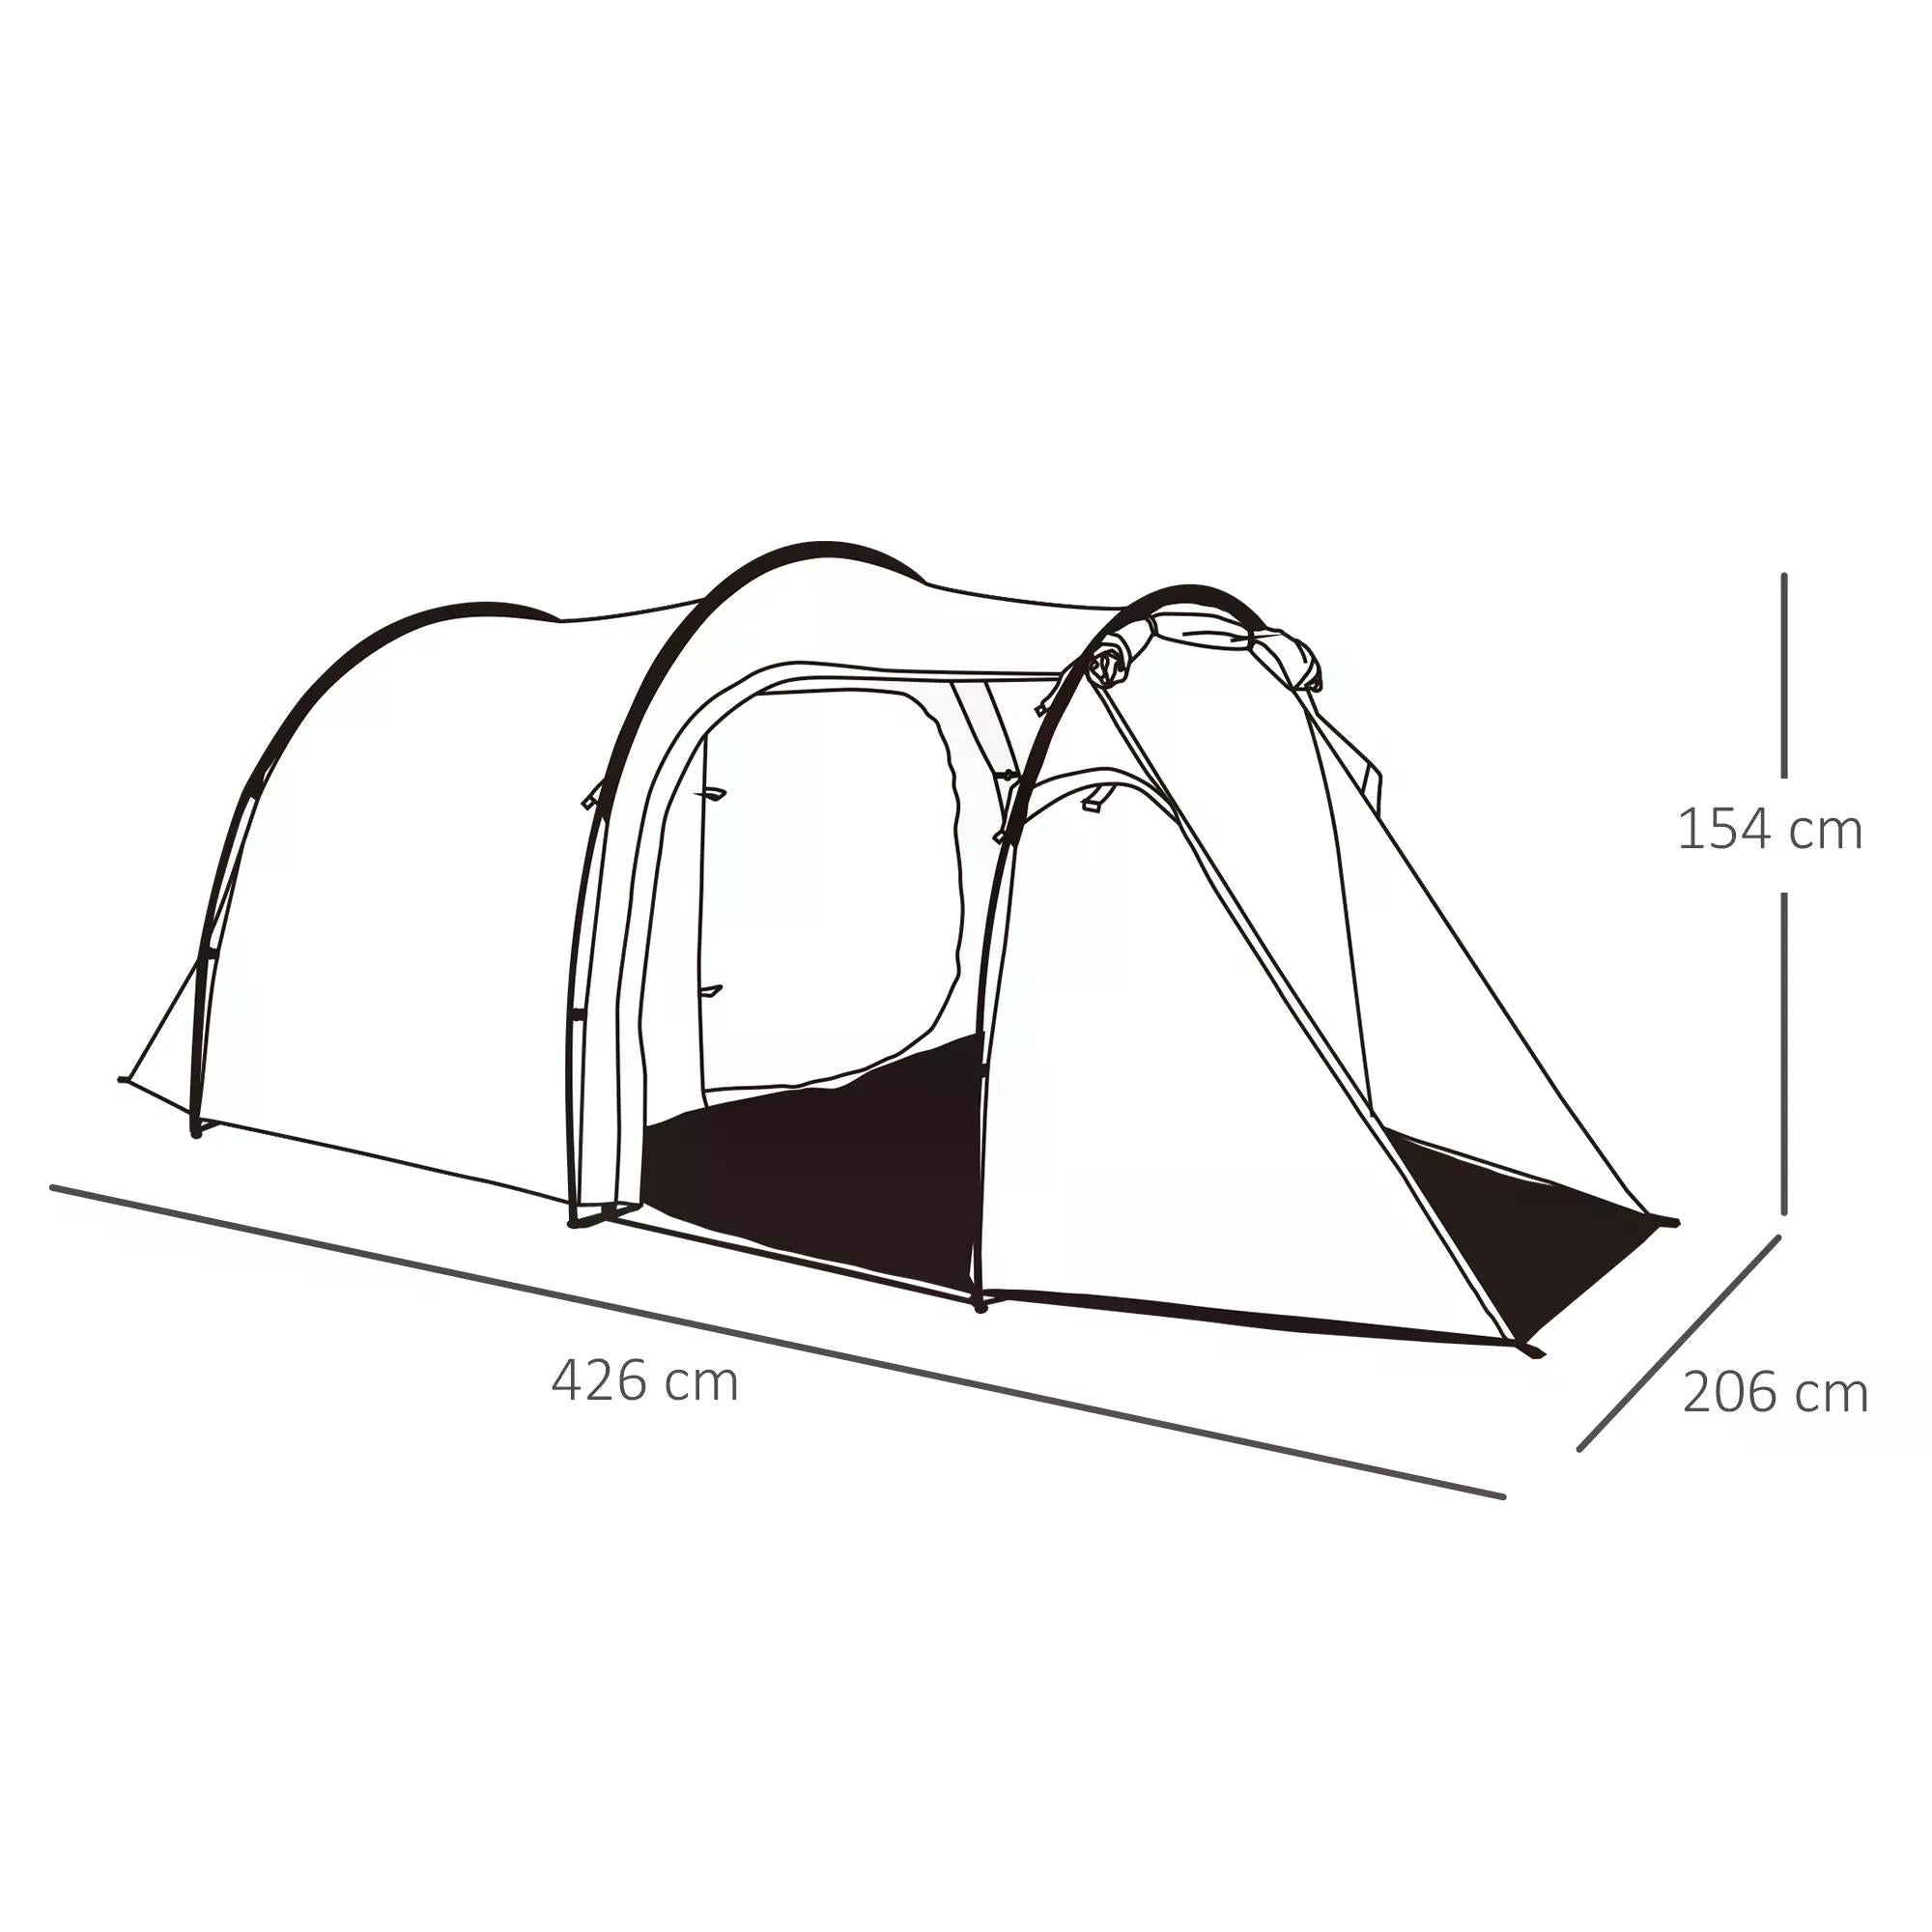 Camping Dome Tent 2 Room for 3-4 Person with Weatherproof Screen Room Vestibule Backpacking Tent Lightweight for Fishing & Hiking Dark Grey-2